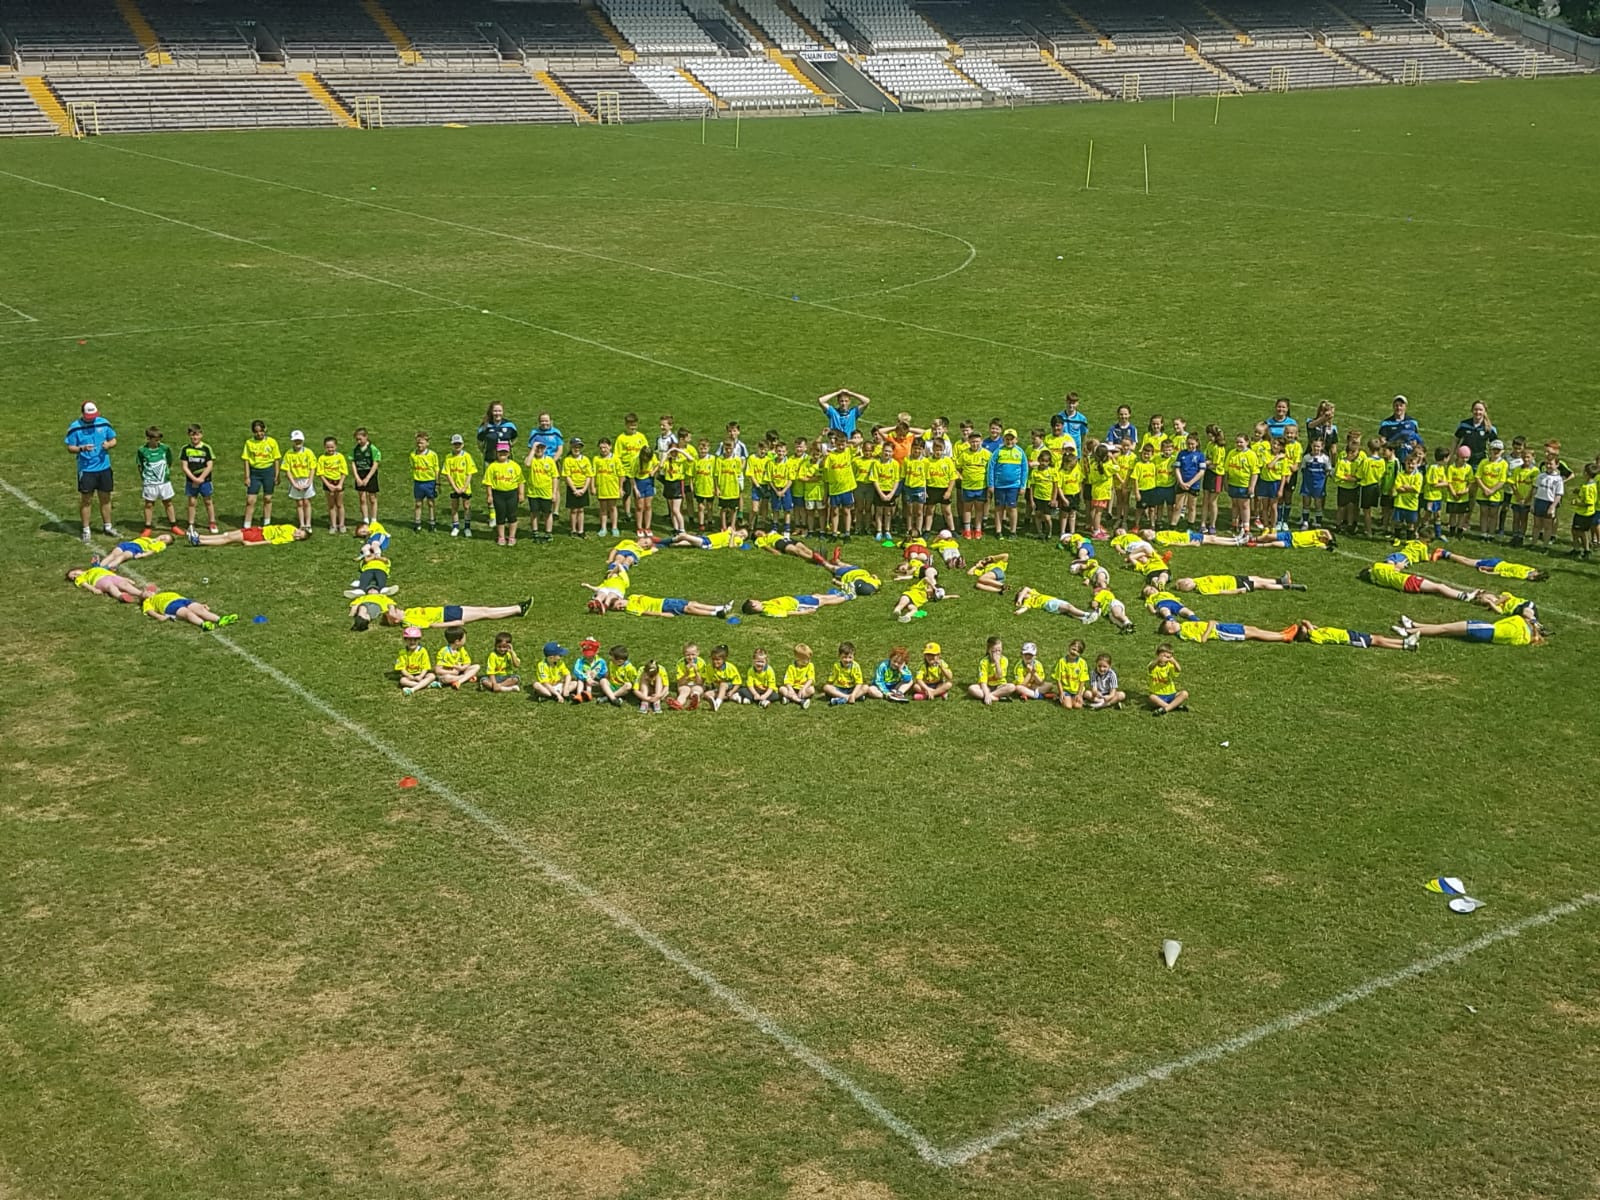 Kelloggs Cúl Camps – 1st week of Camps soar in the good weather! #Cúl4Life